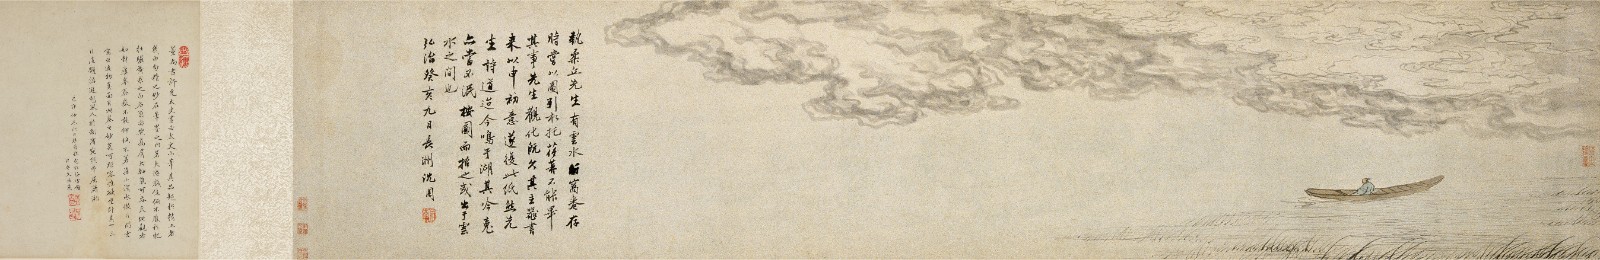 Shen Zhou, A Residence Between Clouds and Waters, Ink and color on paper, 1503, 164×33cm, Collection of CAFAM